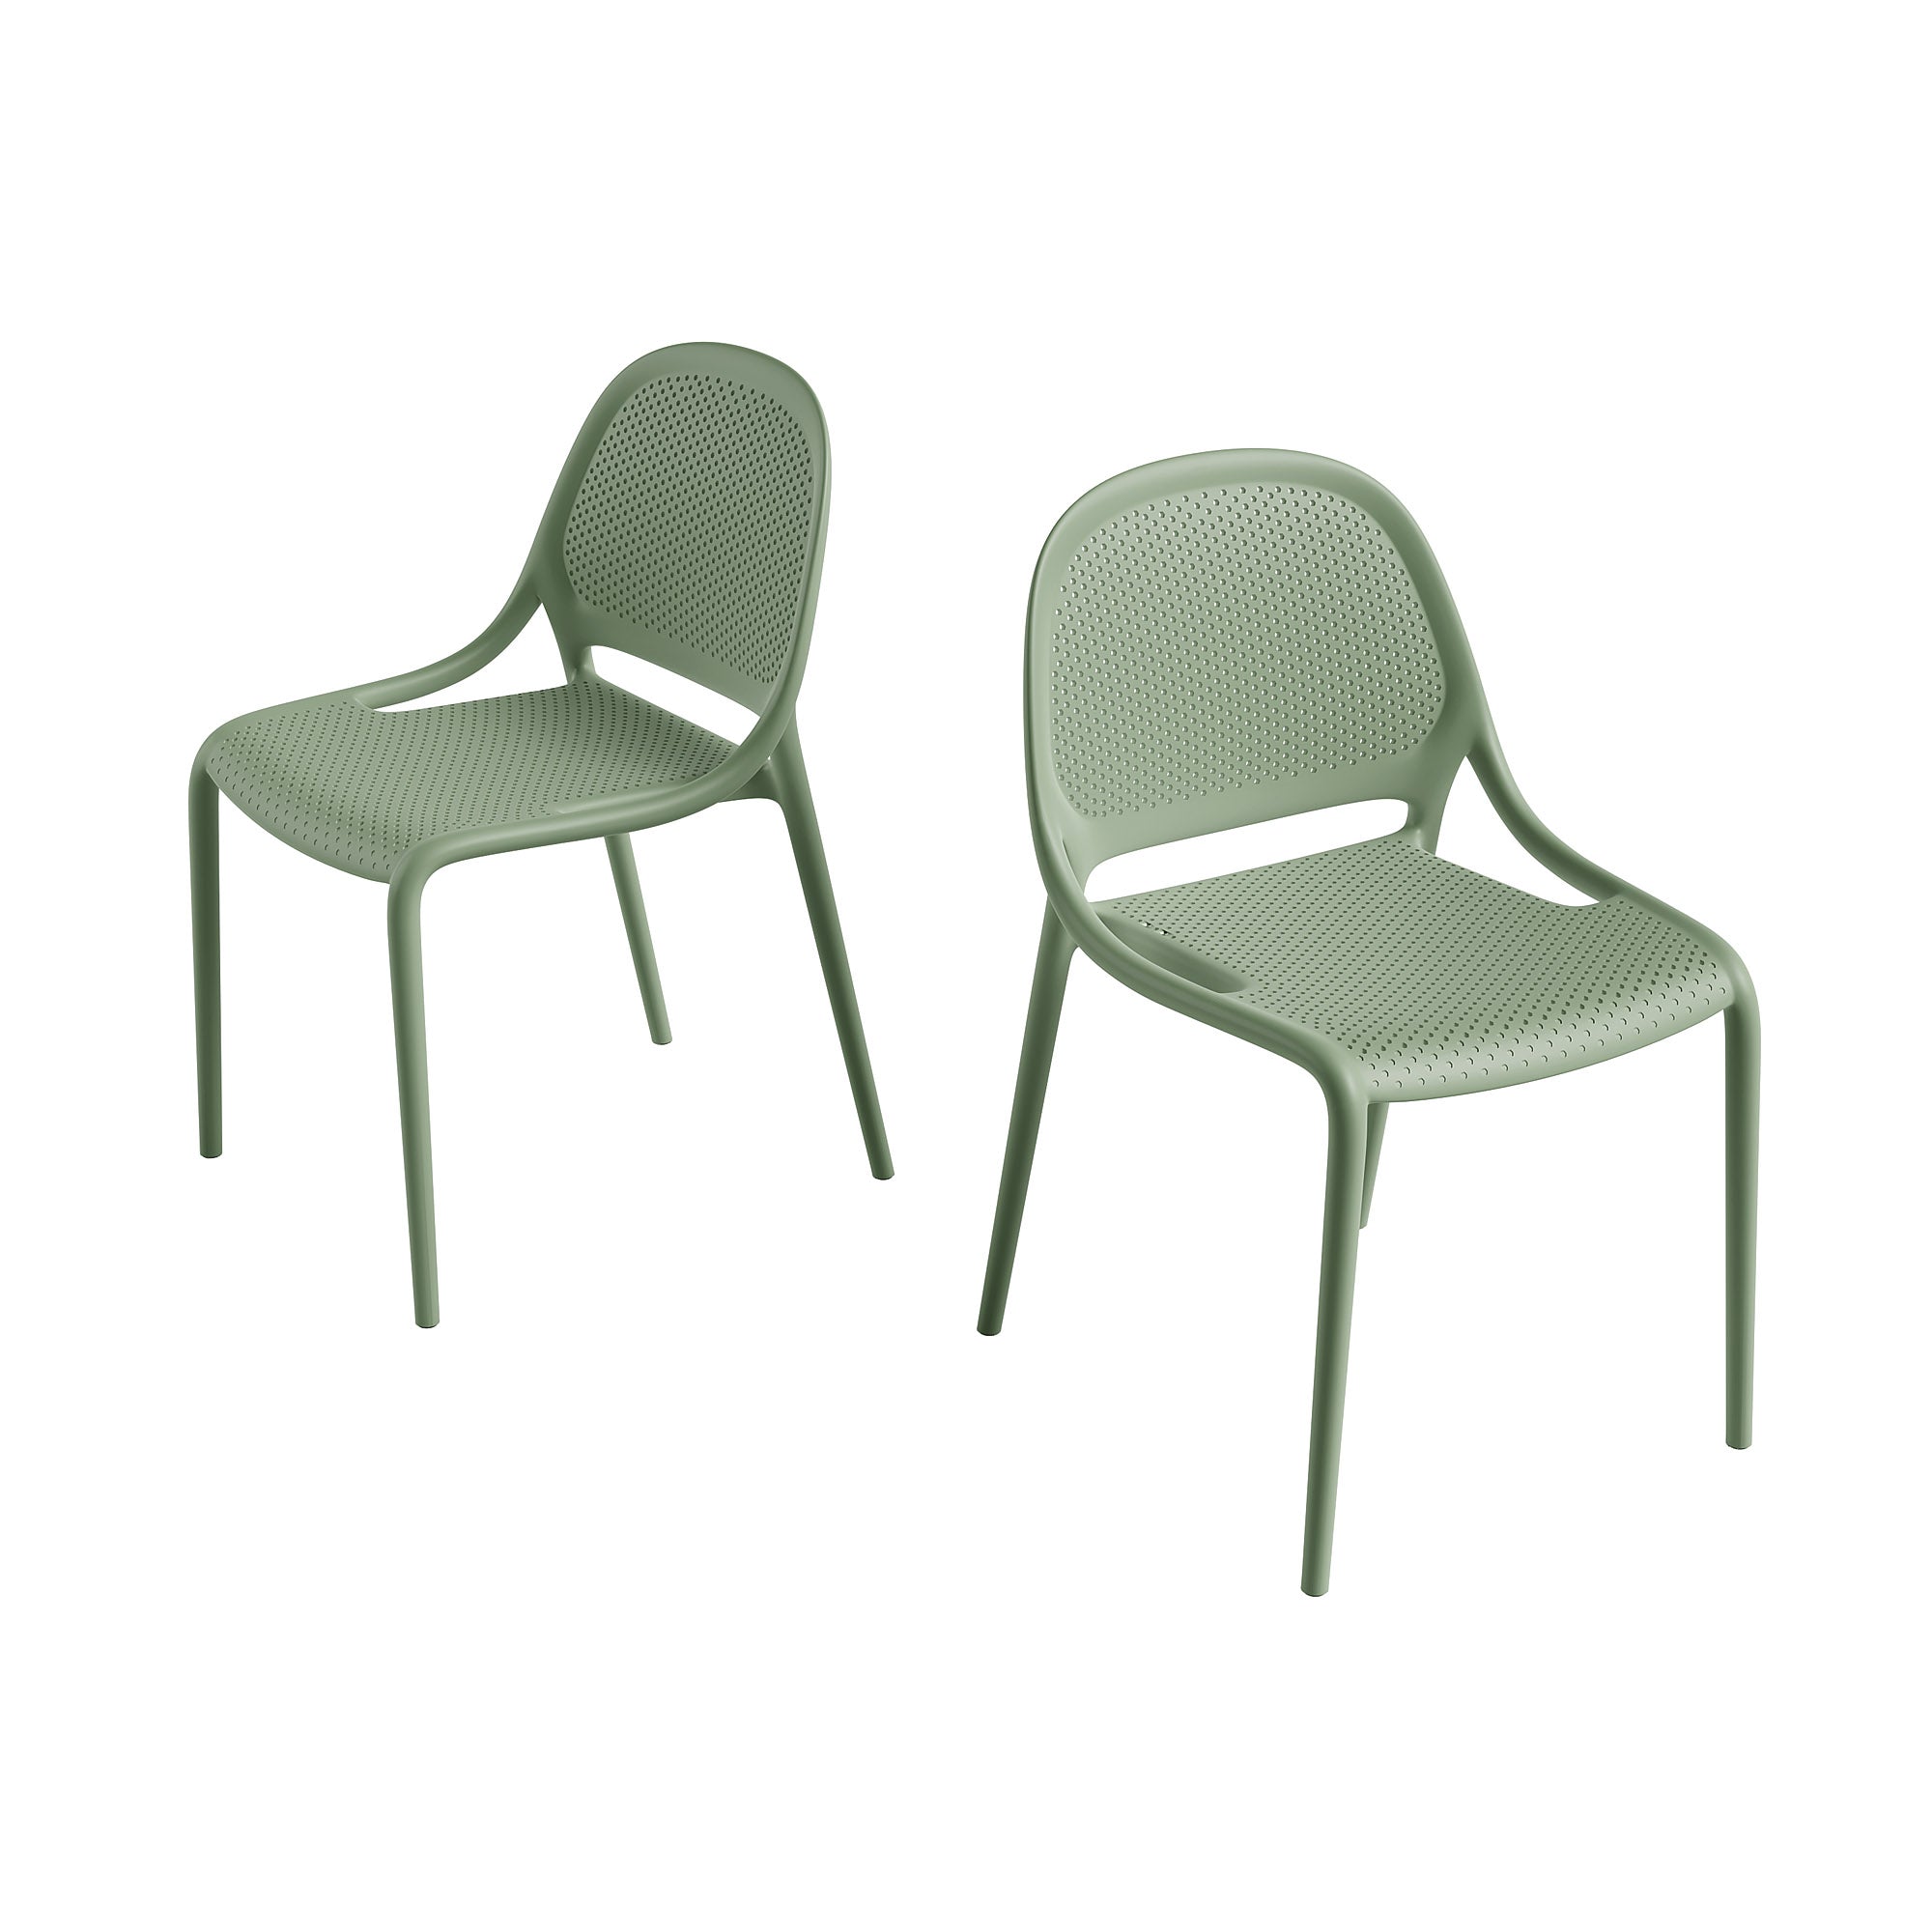 Shay Indoor and Outdoor Stackable Chair - Aloe Green - Set of 2